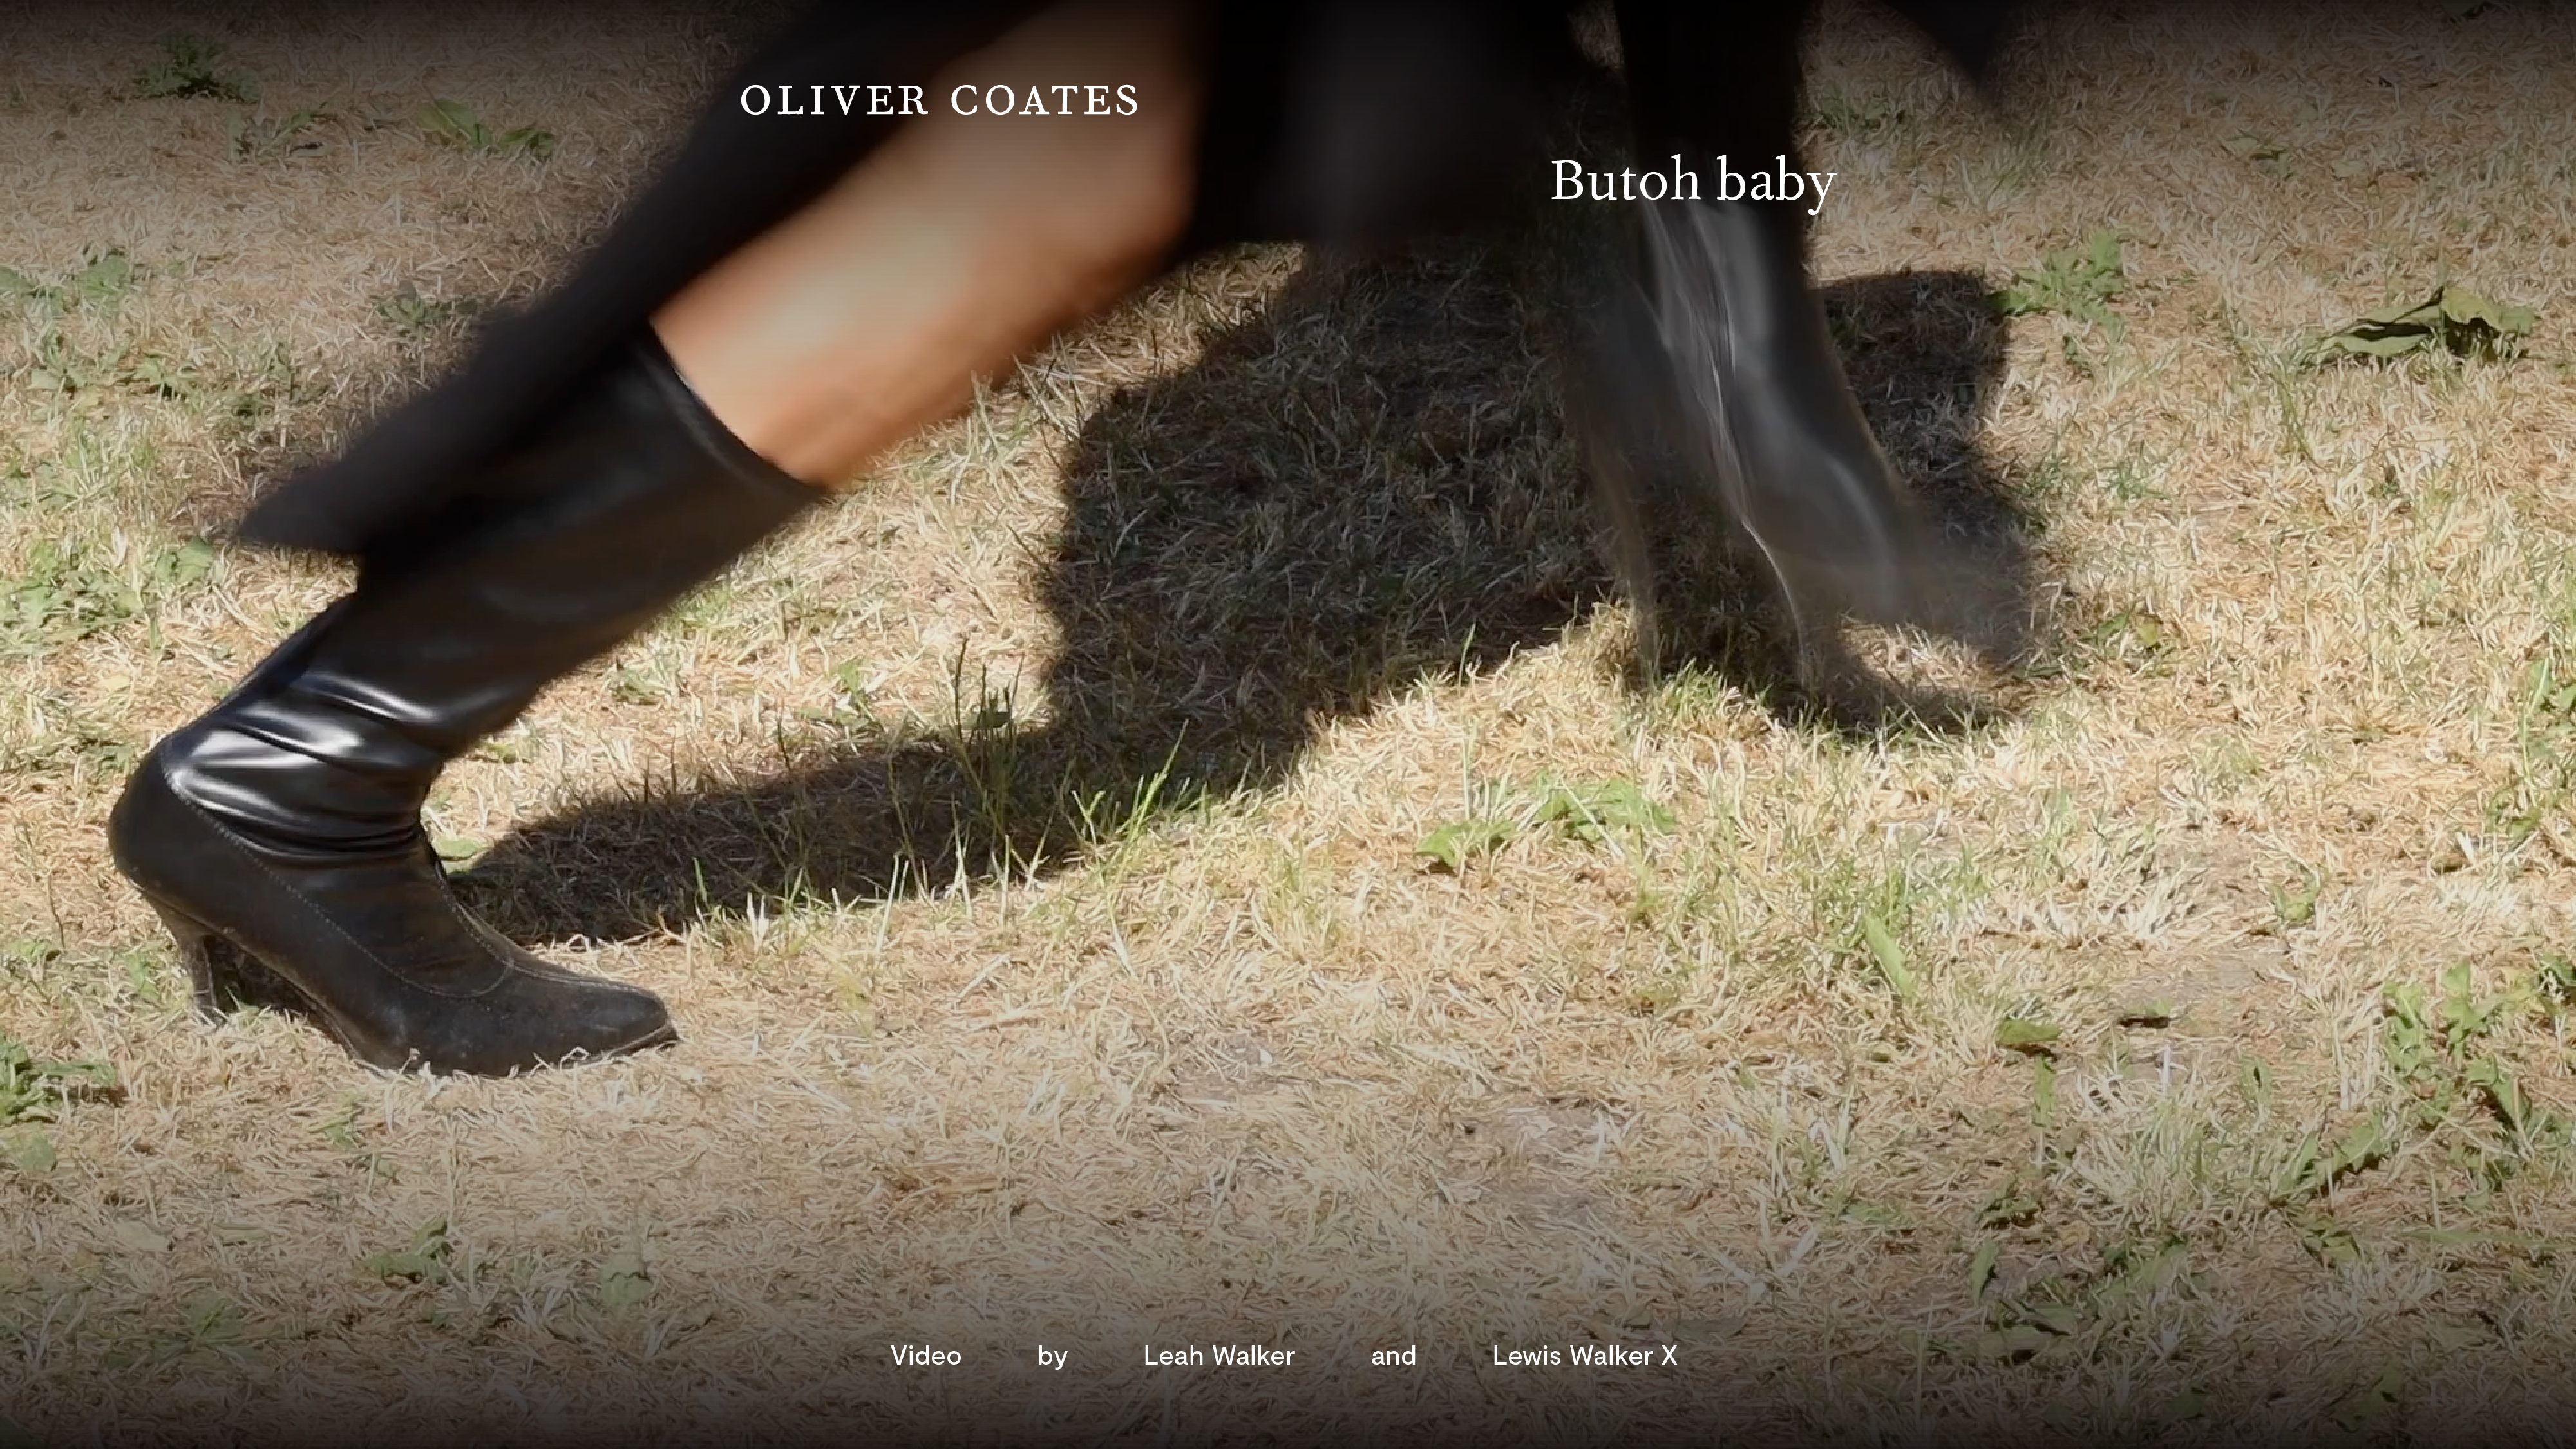 Link to Video for Oliver Coates – Butoh baby